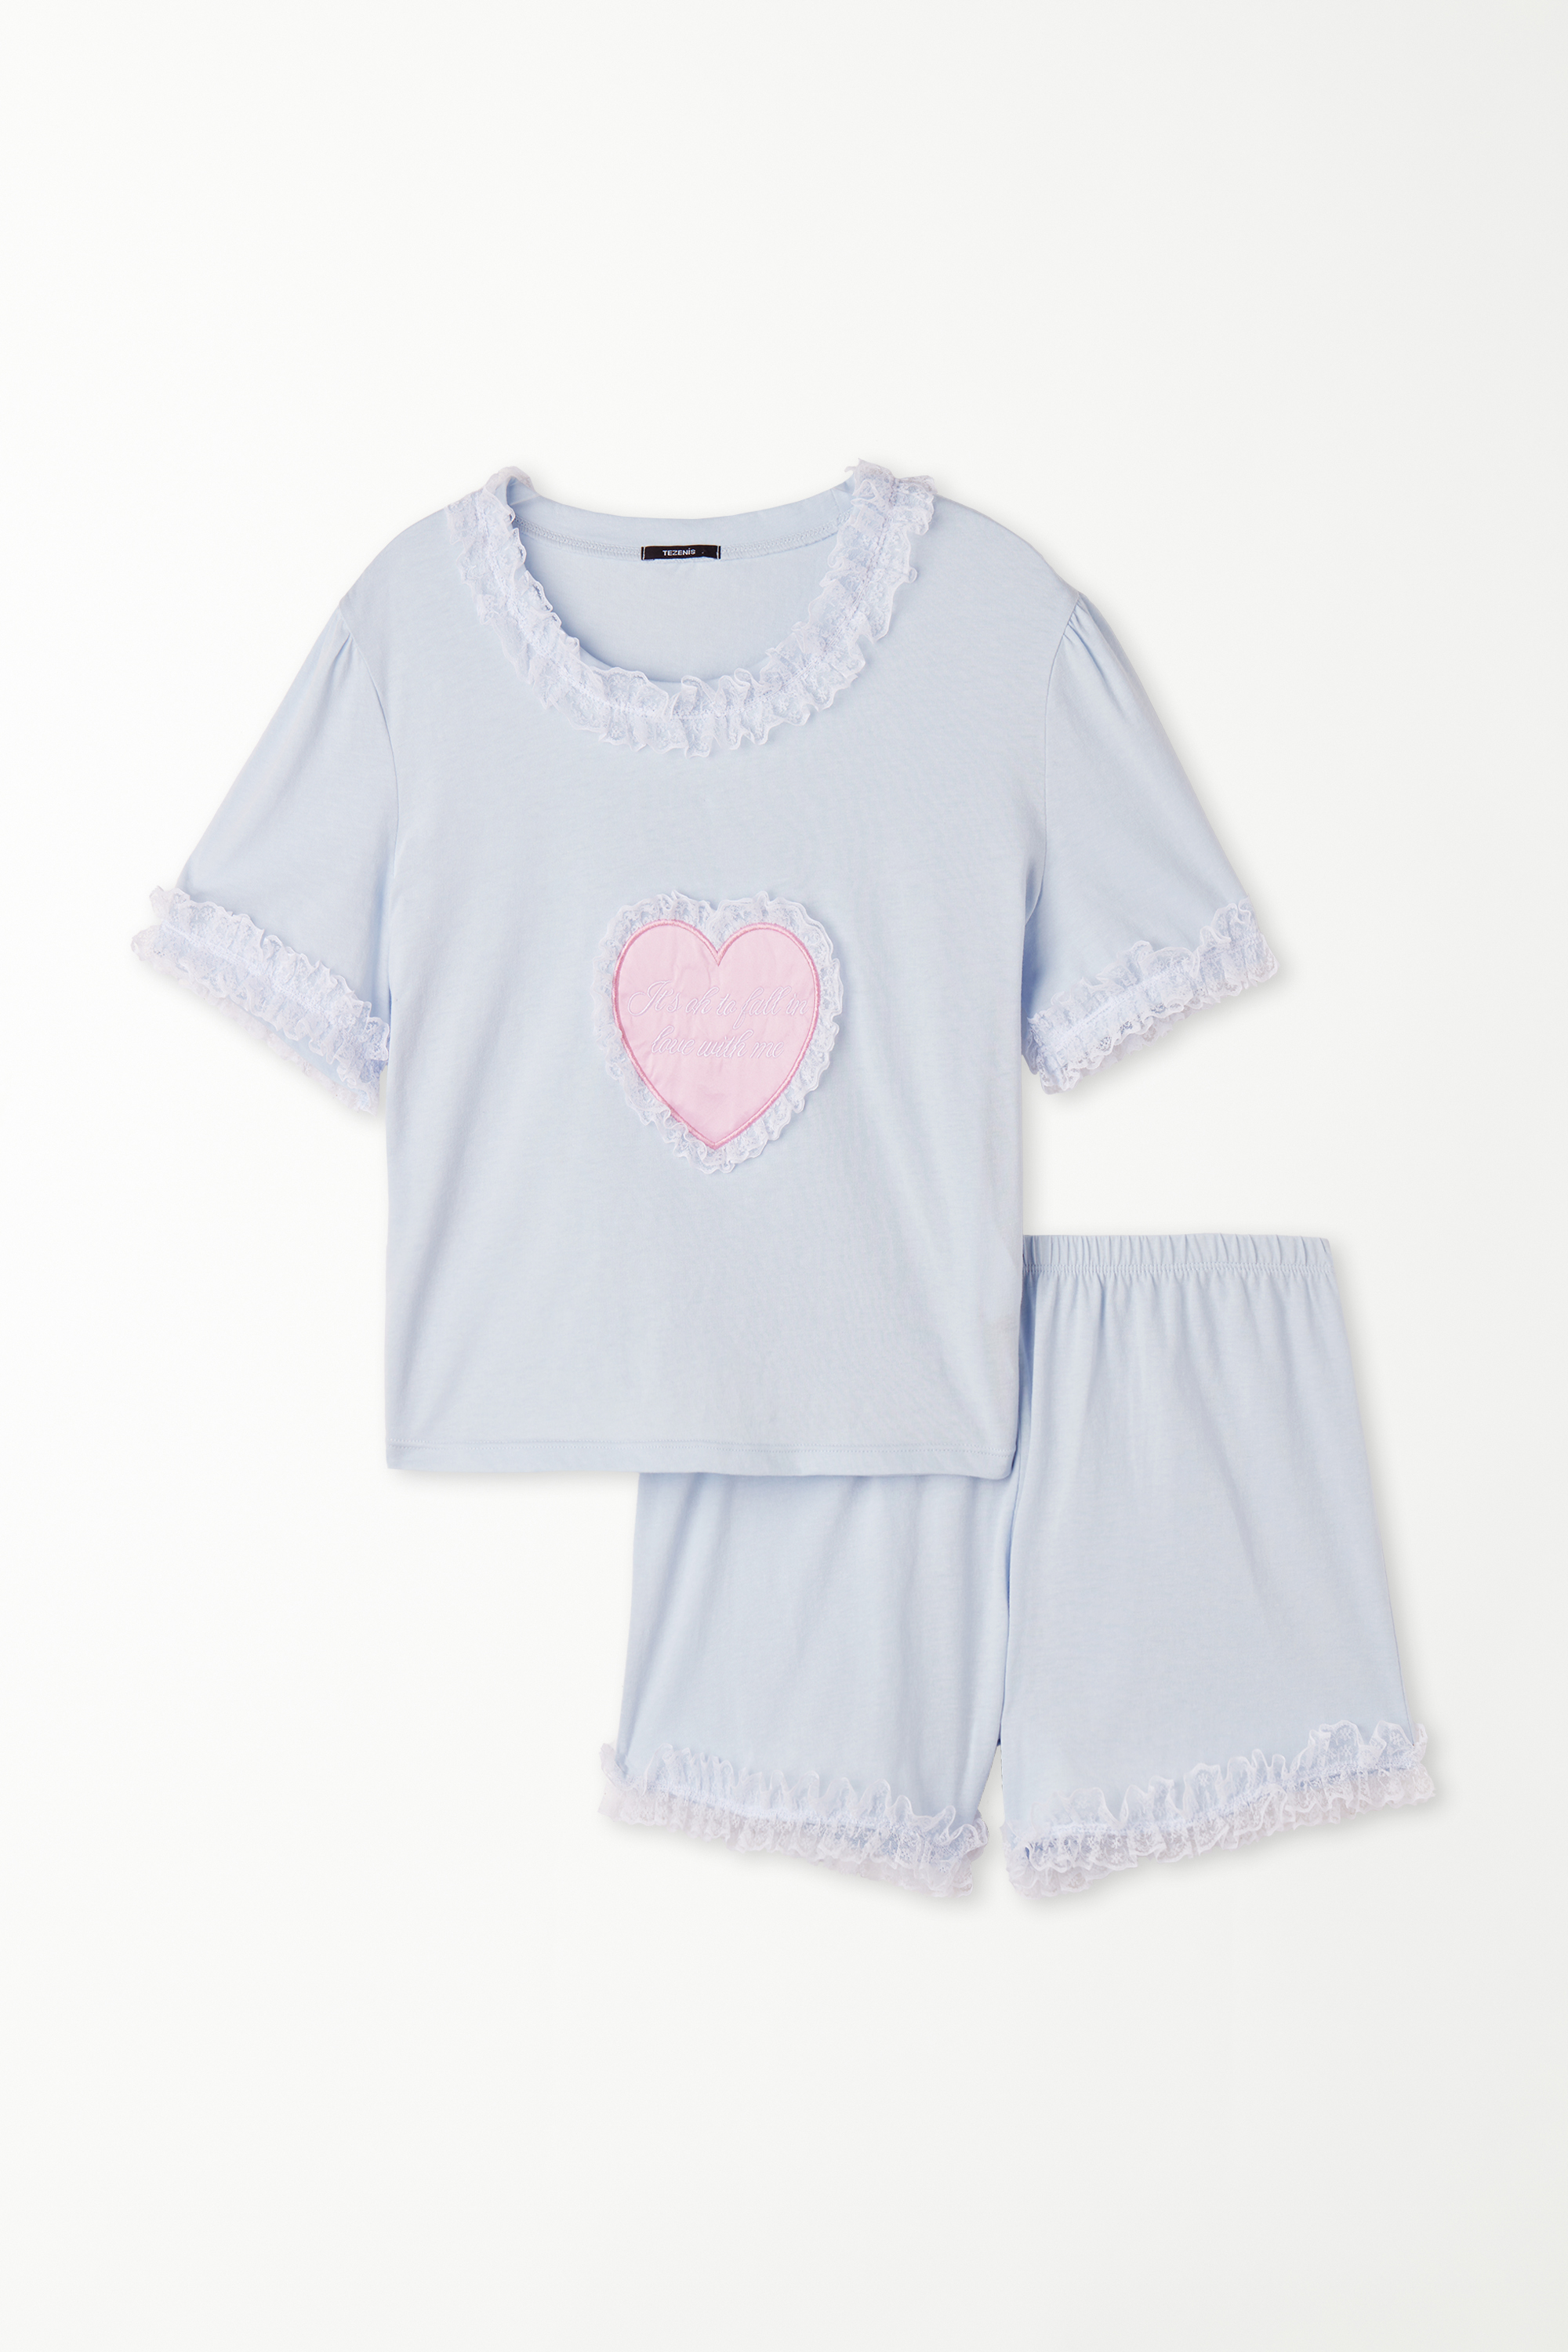 “Fall in Love” Half Sleeve Cotton and Lace Short Pajamas